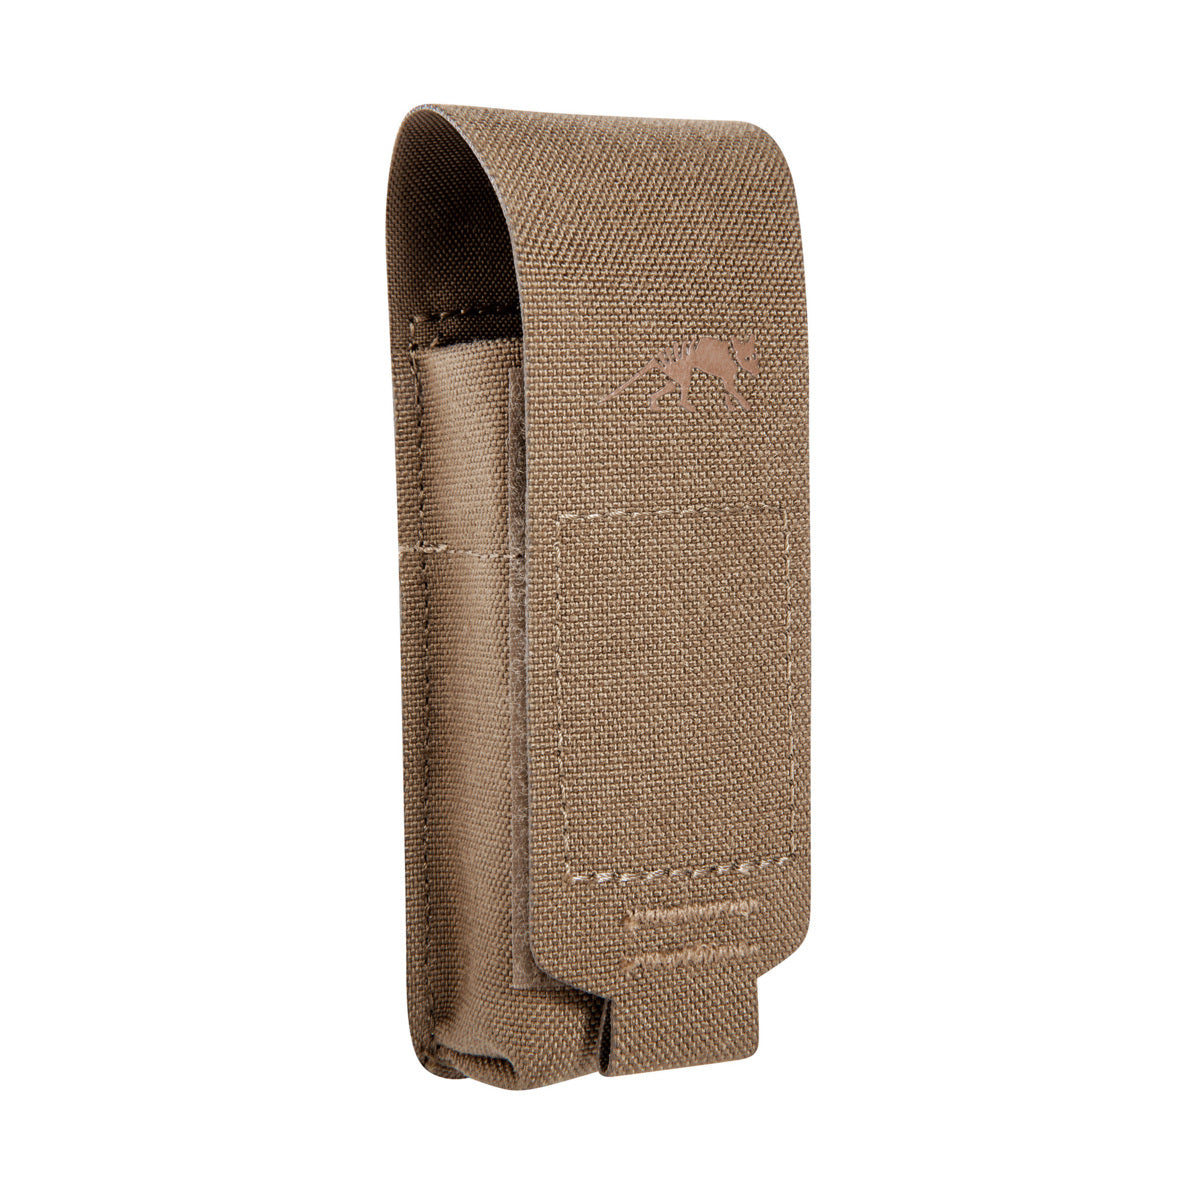 Tasmanian Tiger - SGL Pistol Mag Pouch MKIII - Coyote